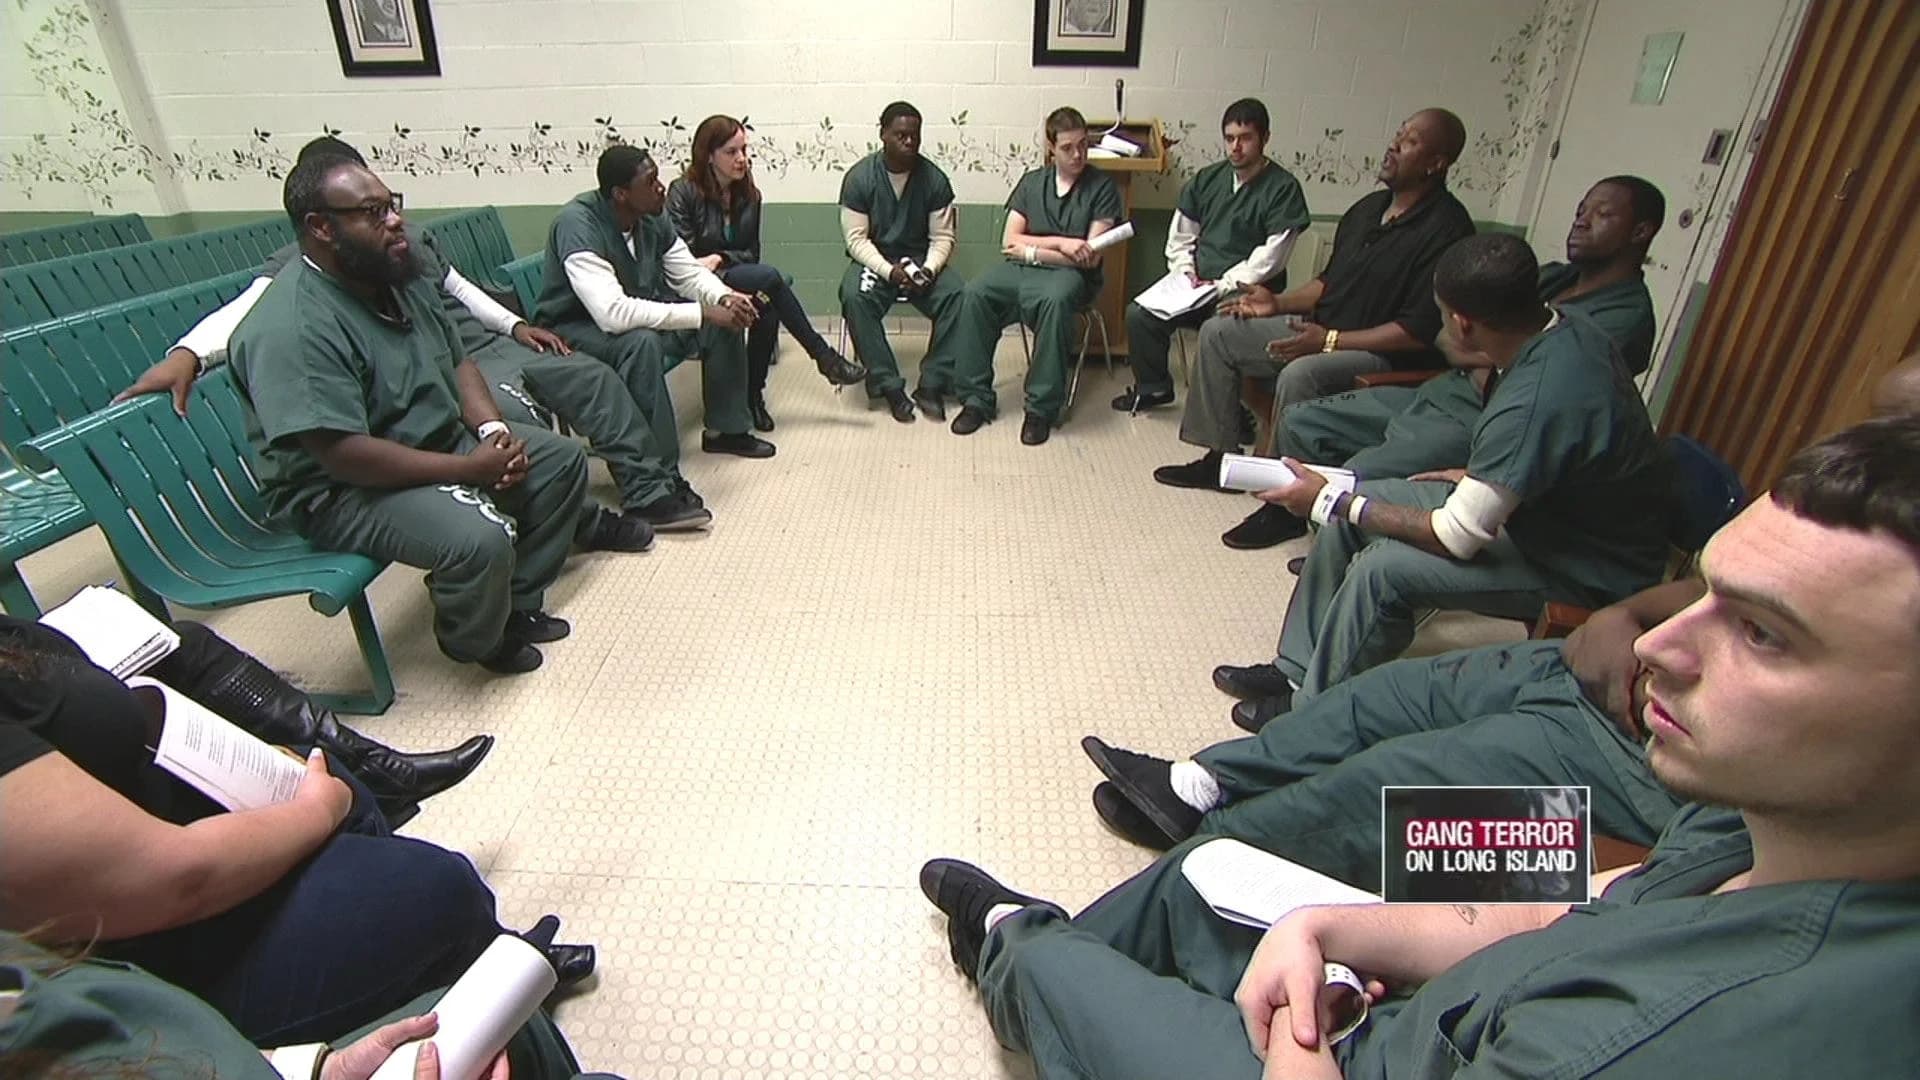 Inmate group 'Council for Unity' offers insight into recent gang violence